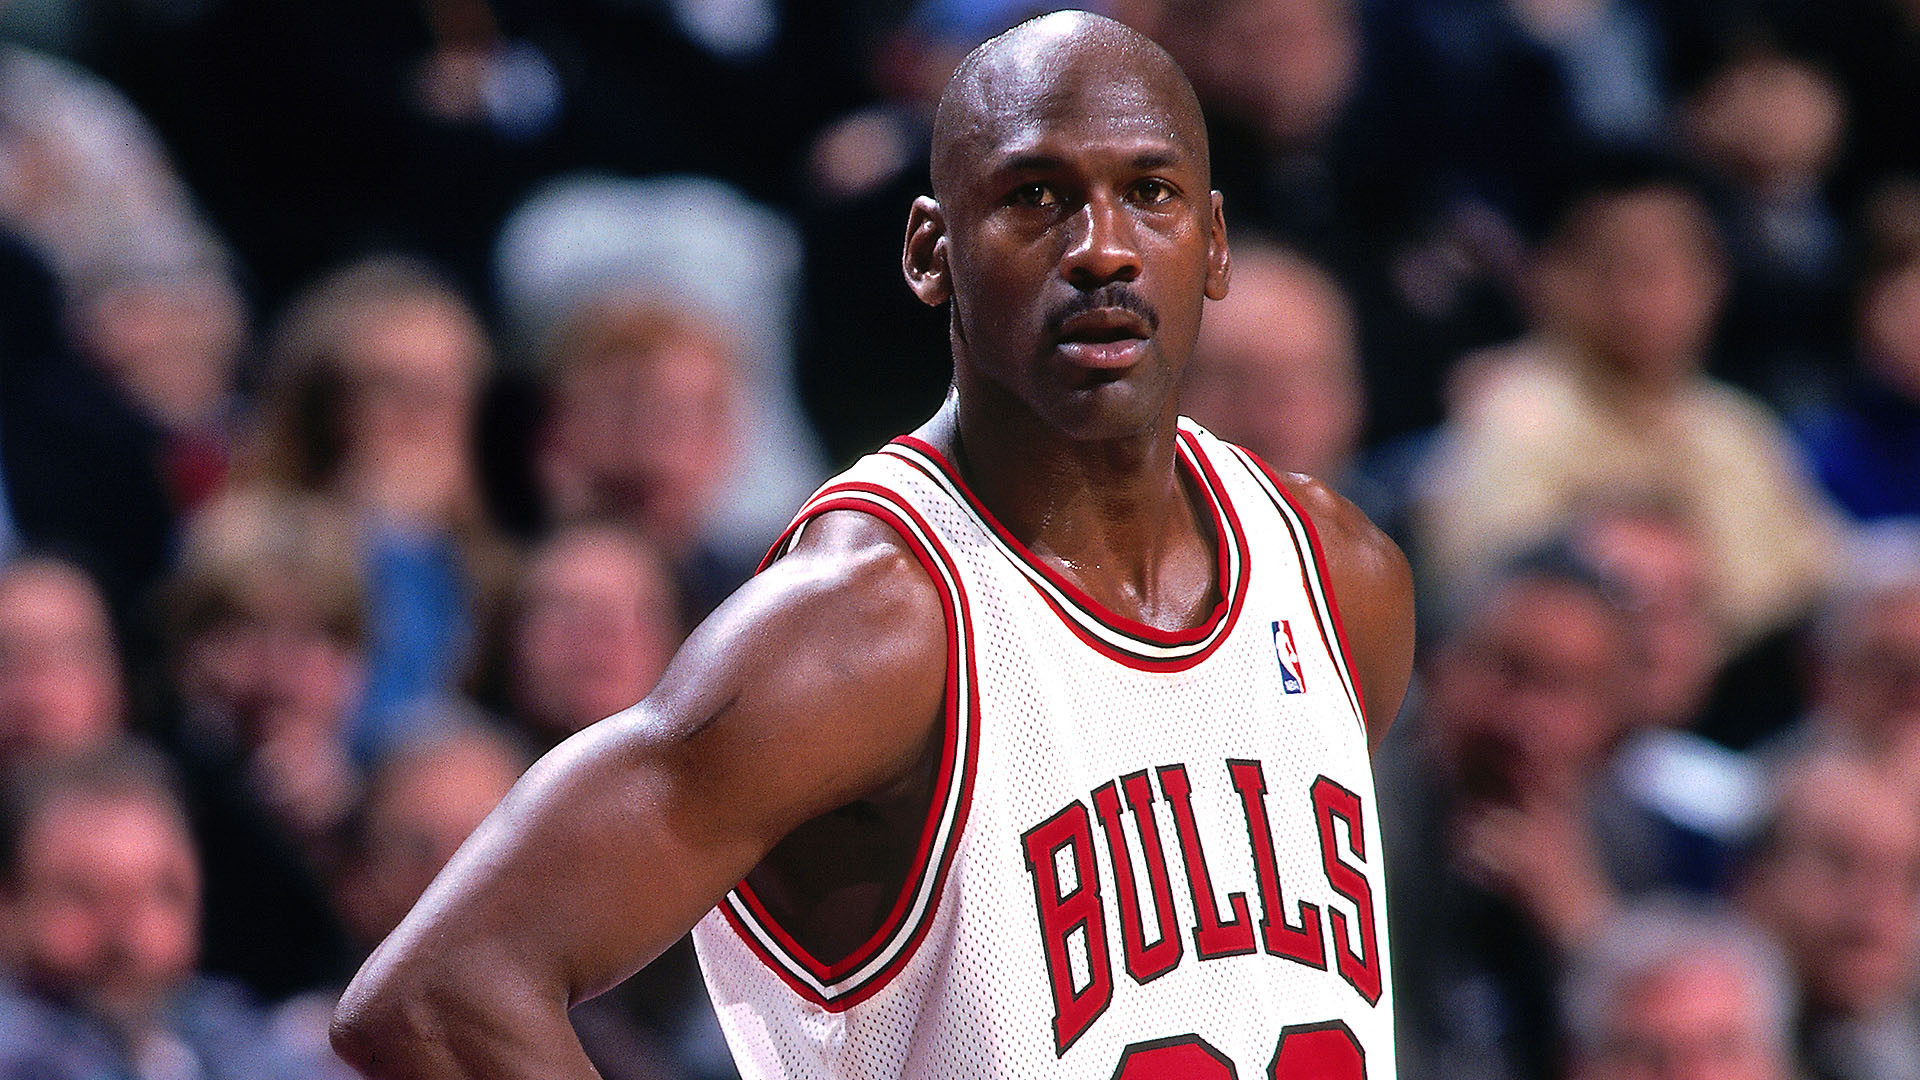 “I've never lost a game I just ran out of time” Commemorating the Great Michael Jordan on His Birthday